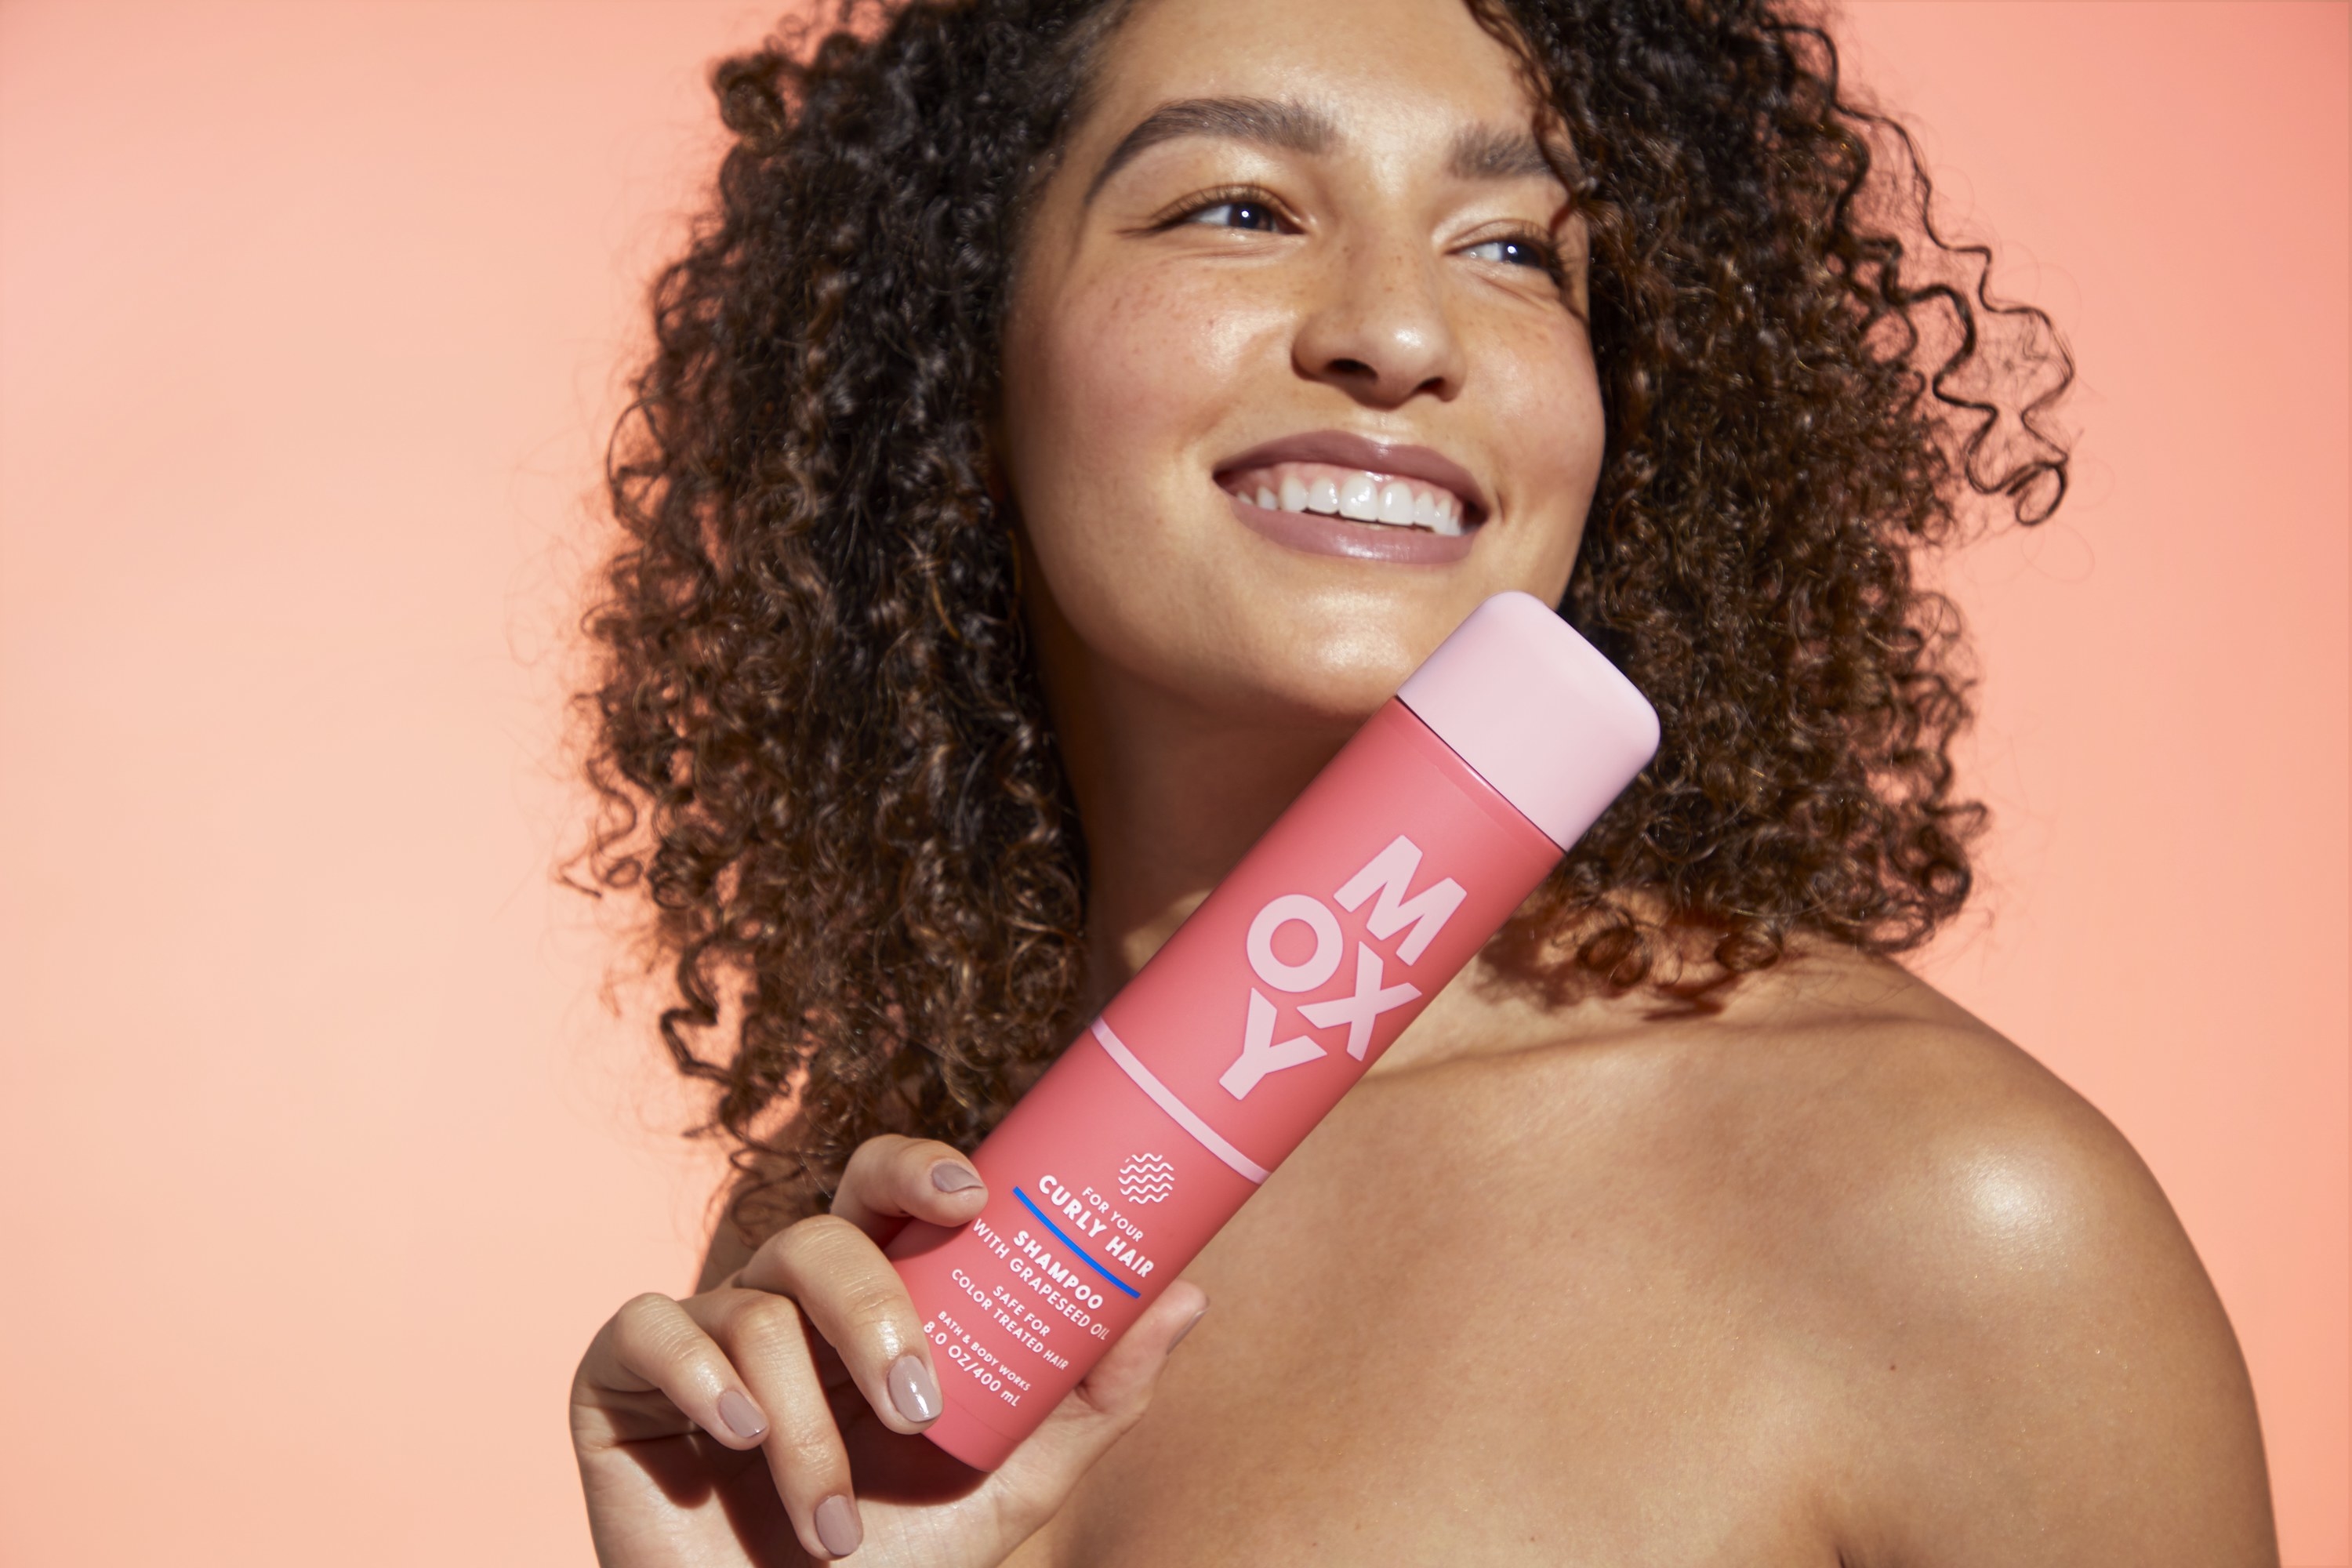 A woman smiling while holding Curly Hair shampoo